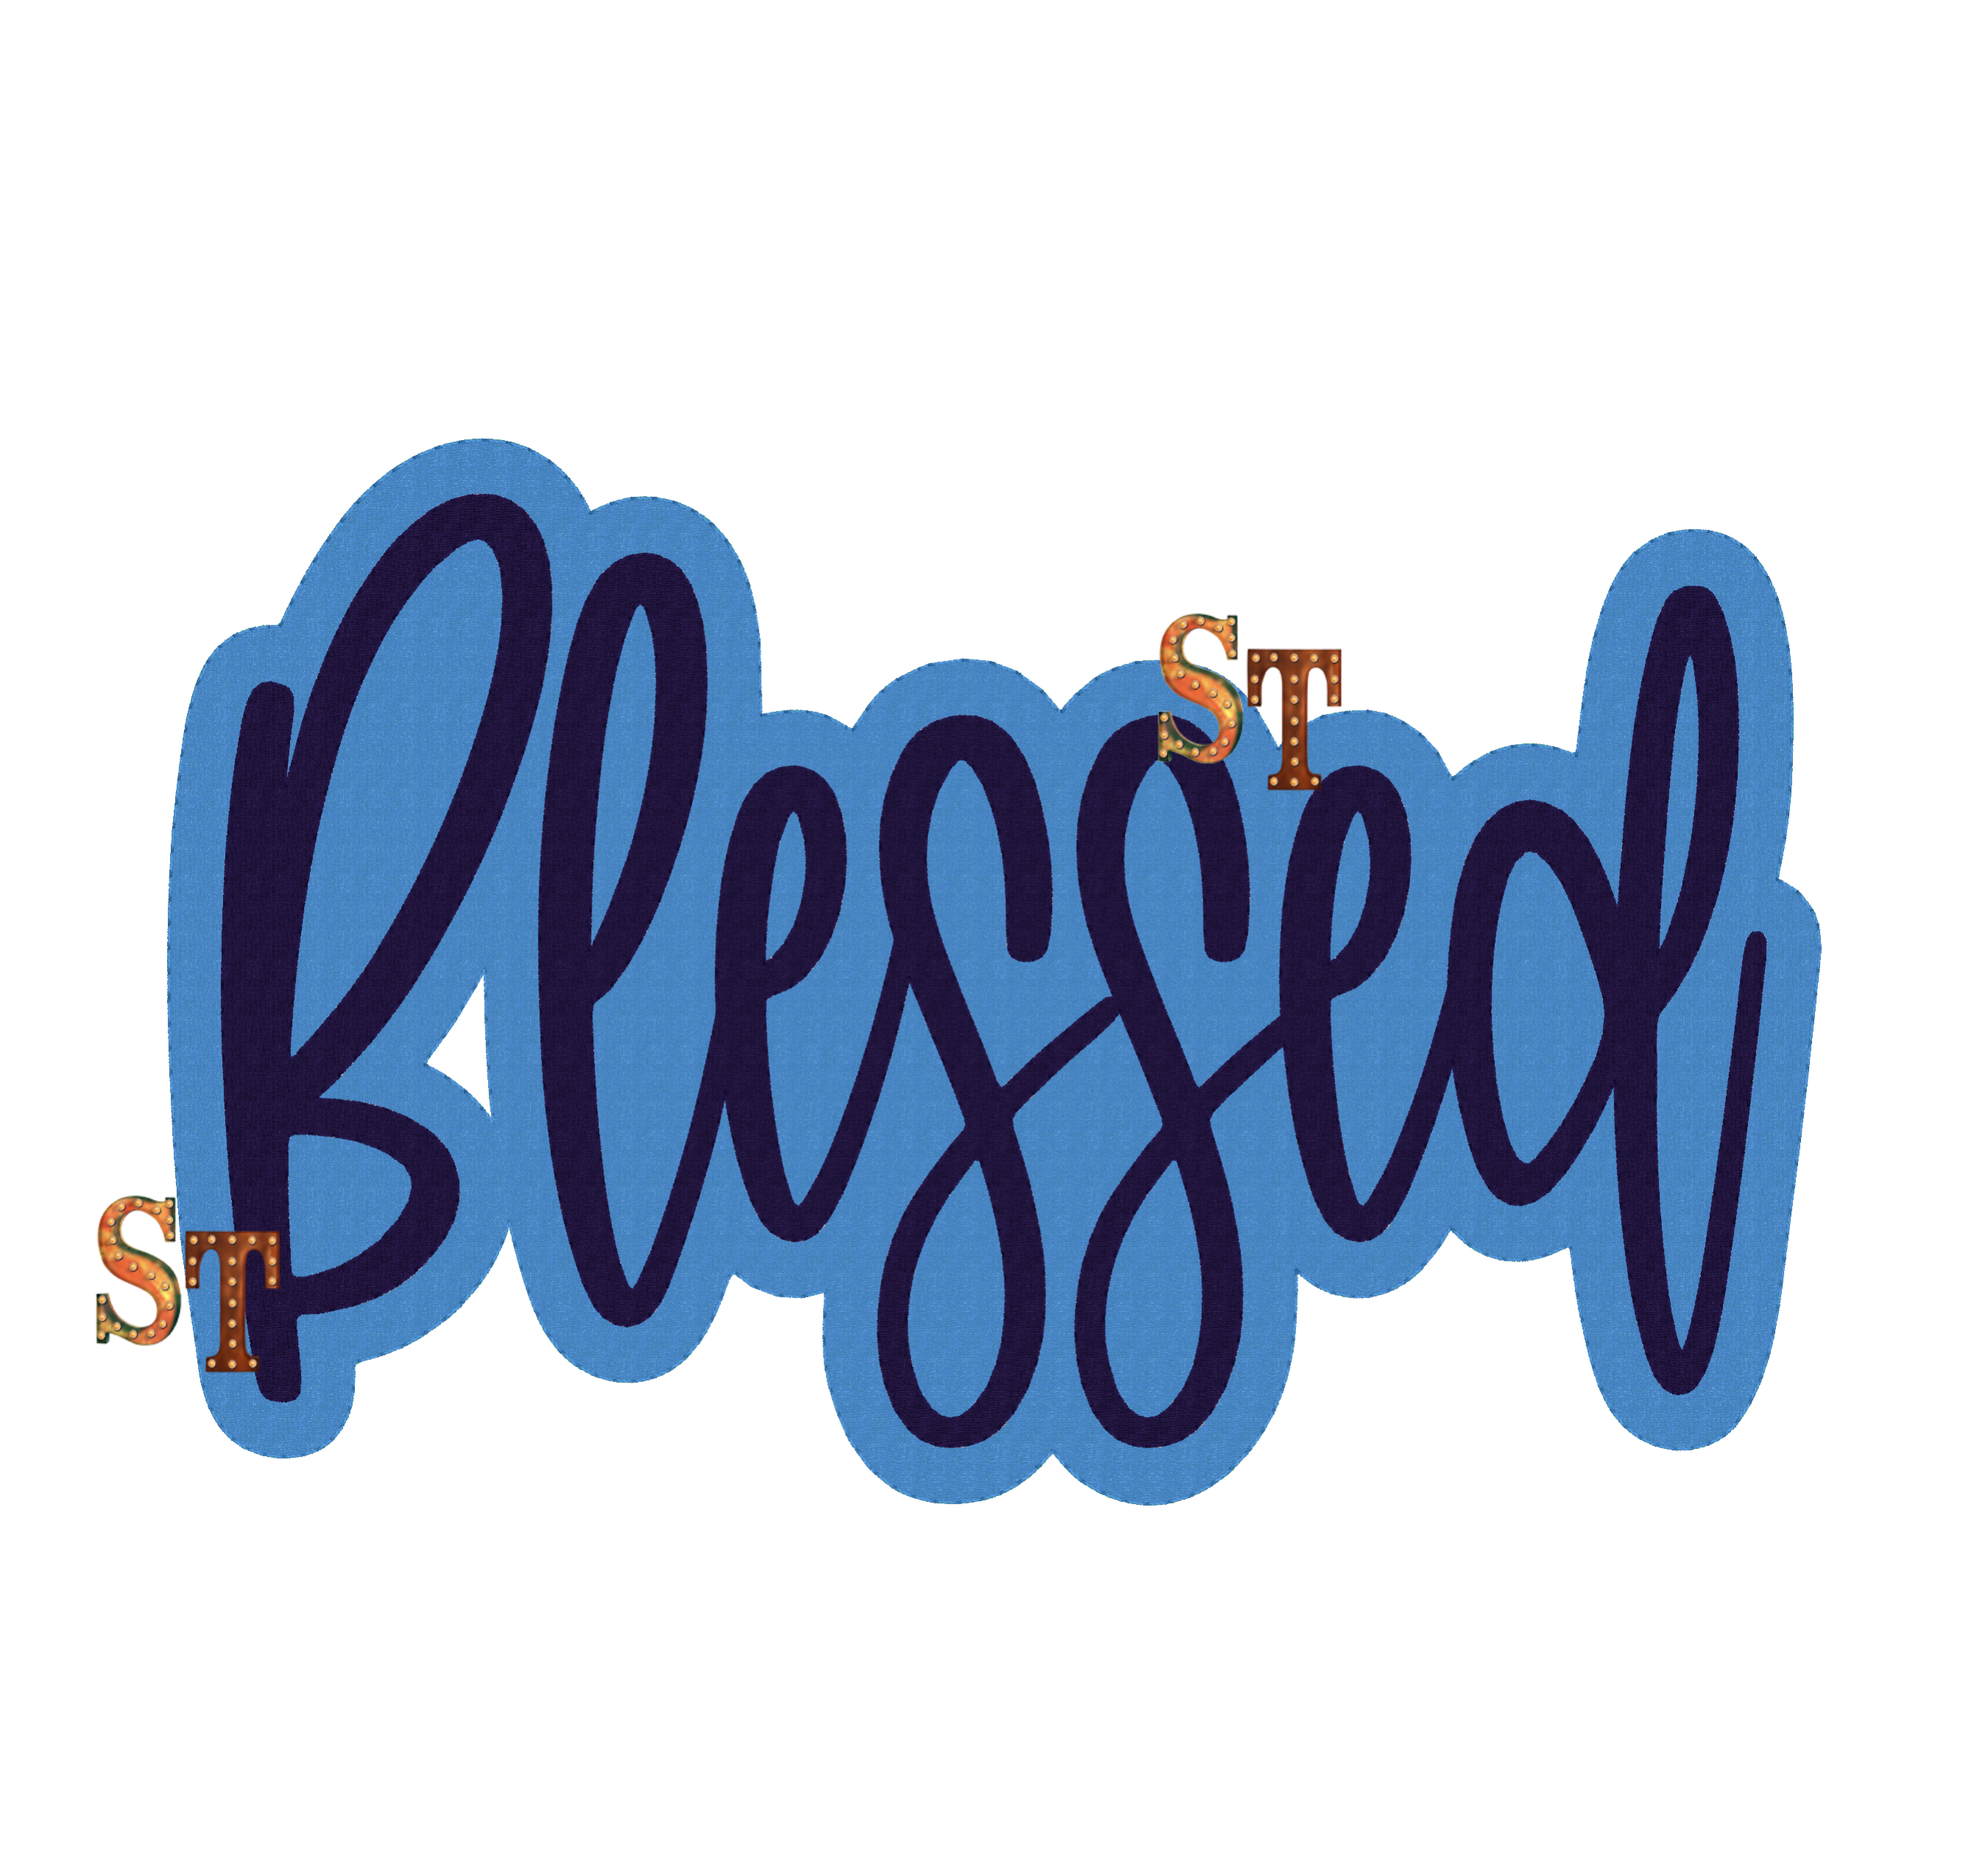 Blessed Script Stacked Embroidery Download - Sassy Threadz